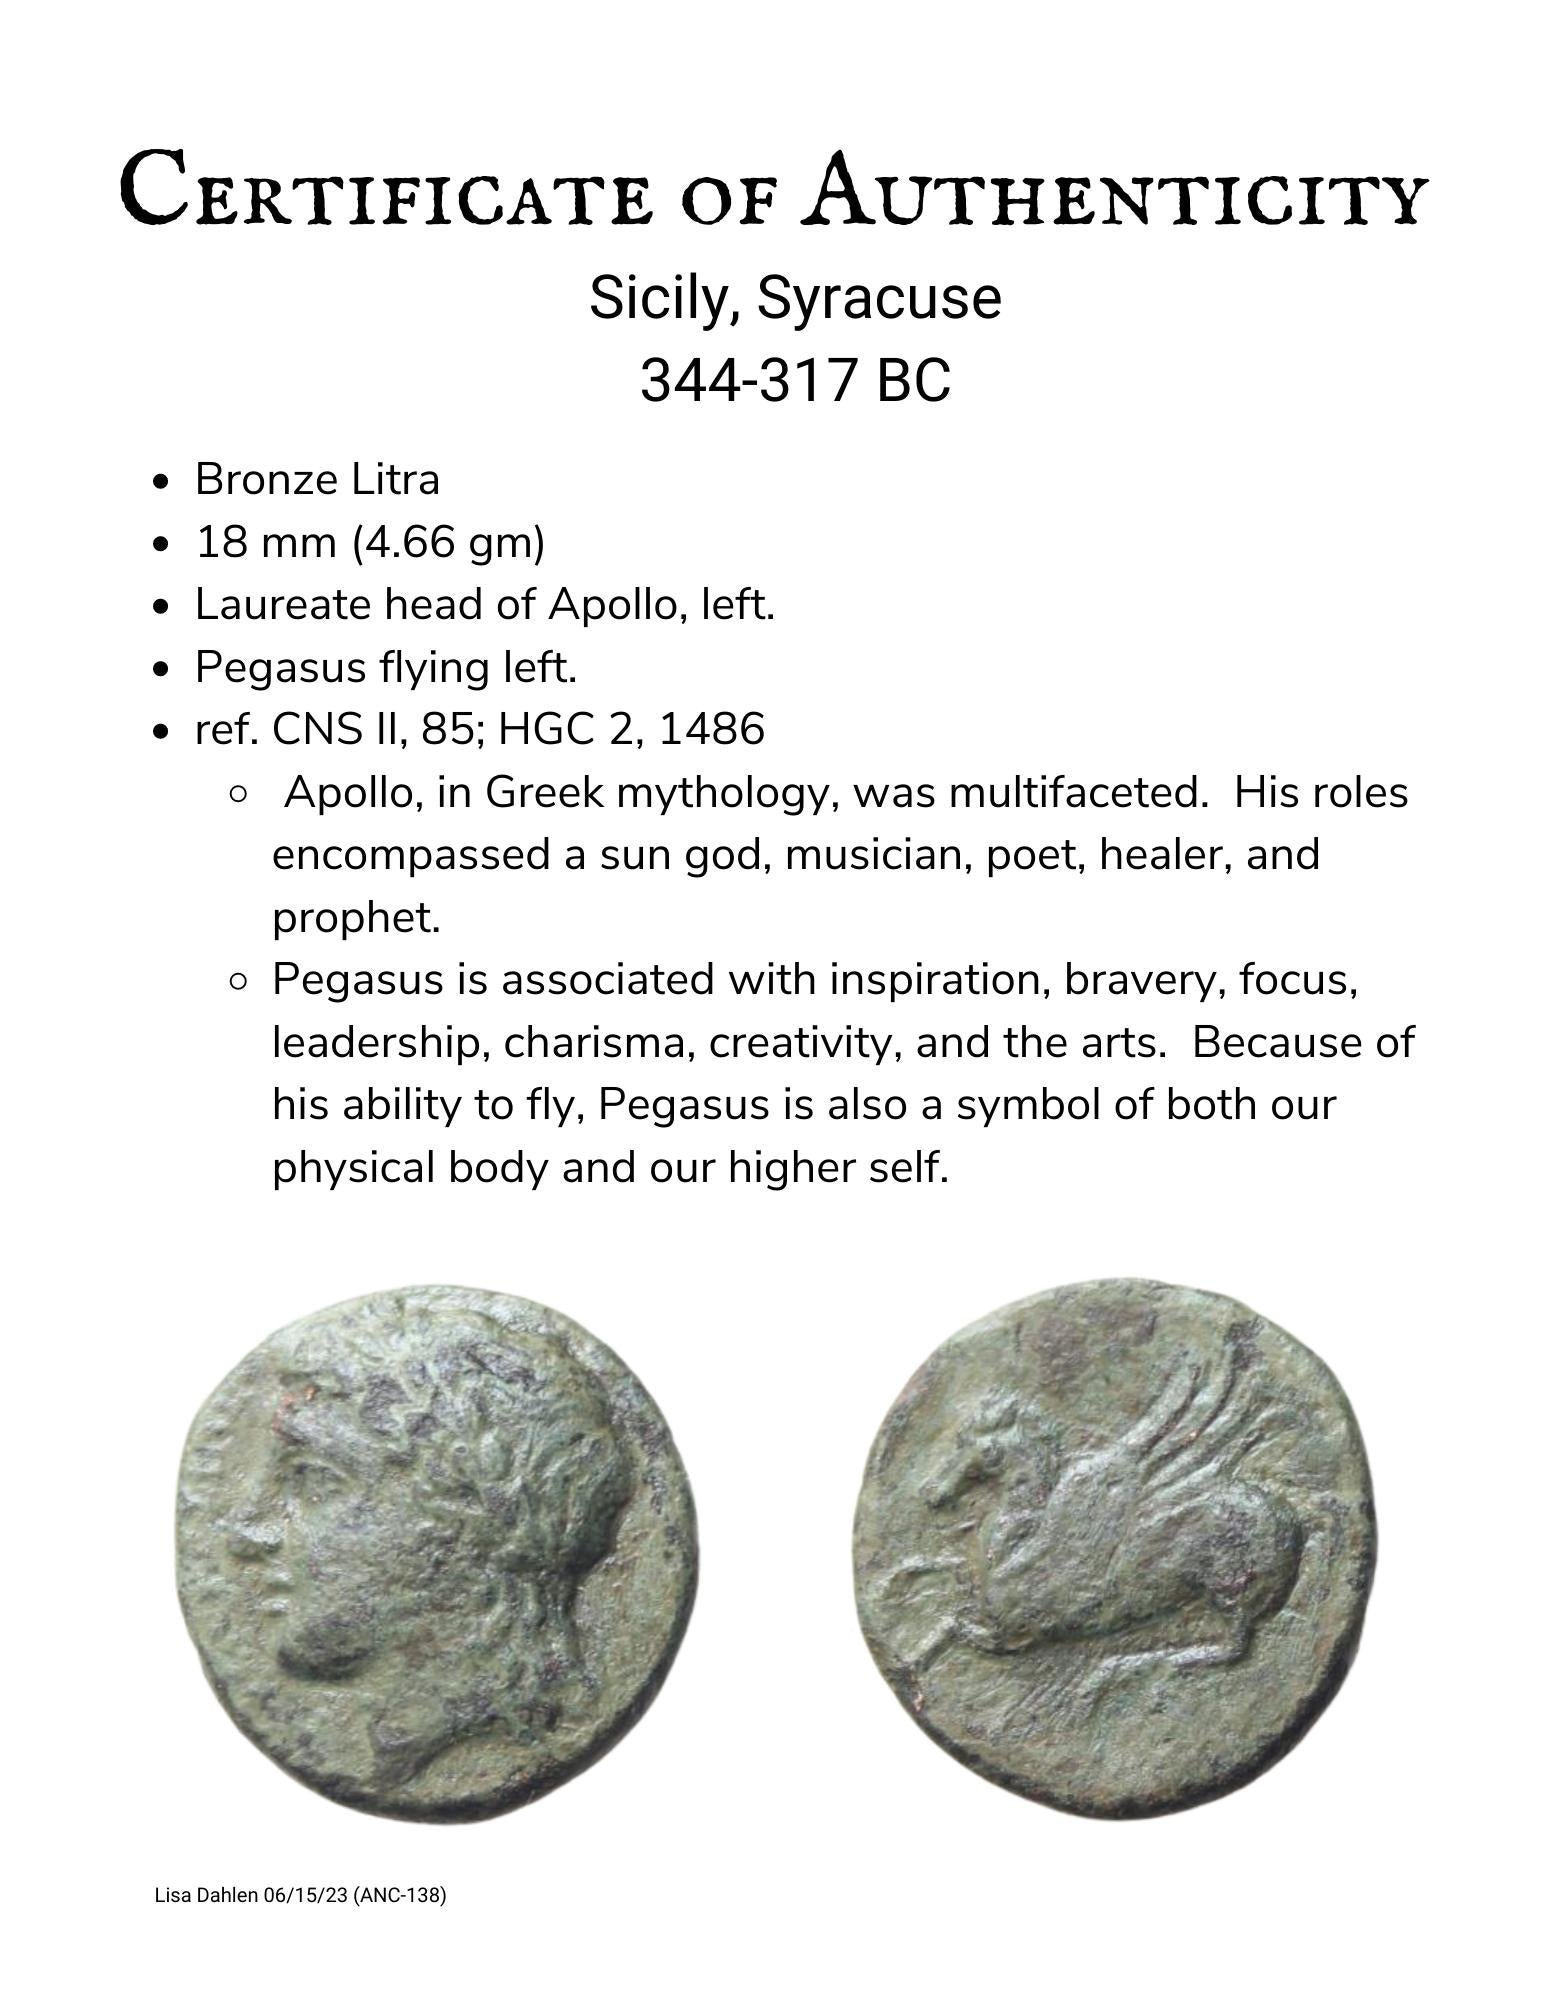 Certificate of authenticity of ancient Greek bronze coin from Syracuse, Sicily of Apollo and Pegasus 344-317 BC